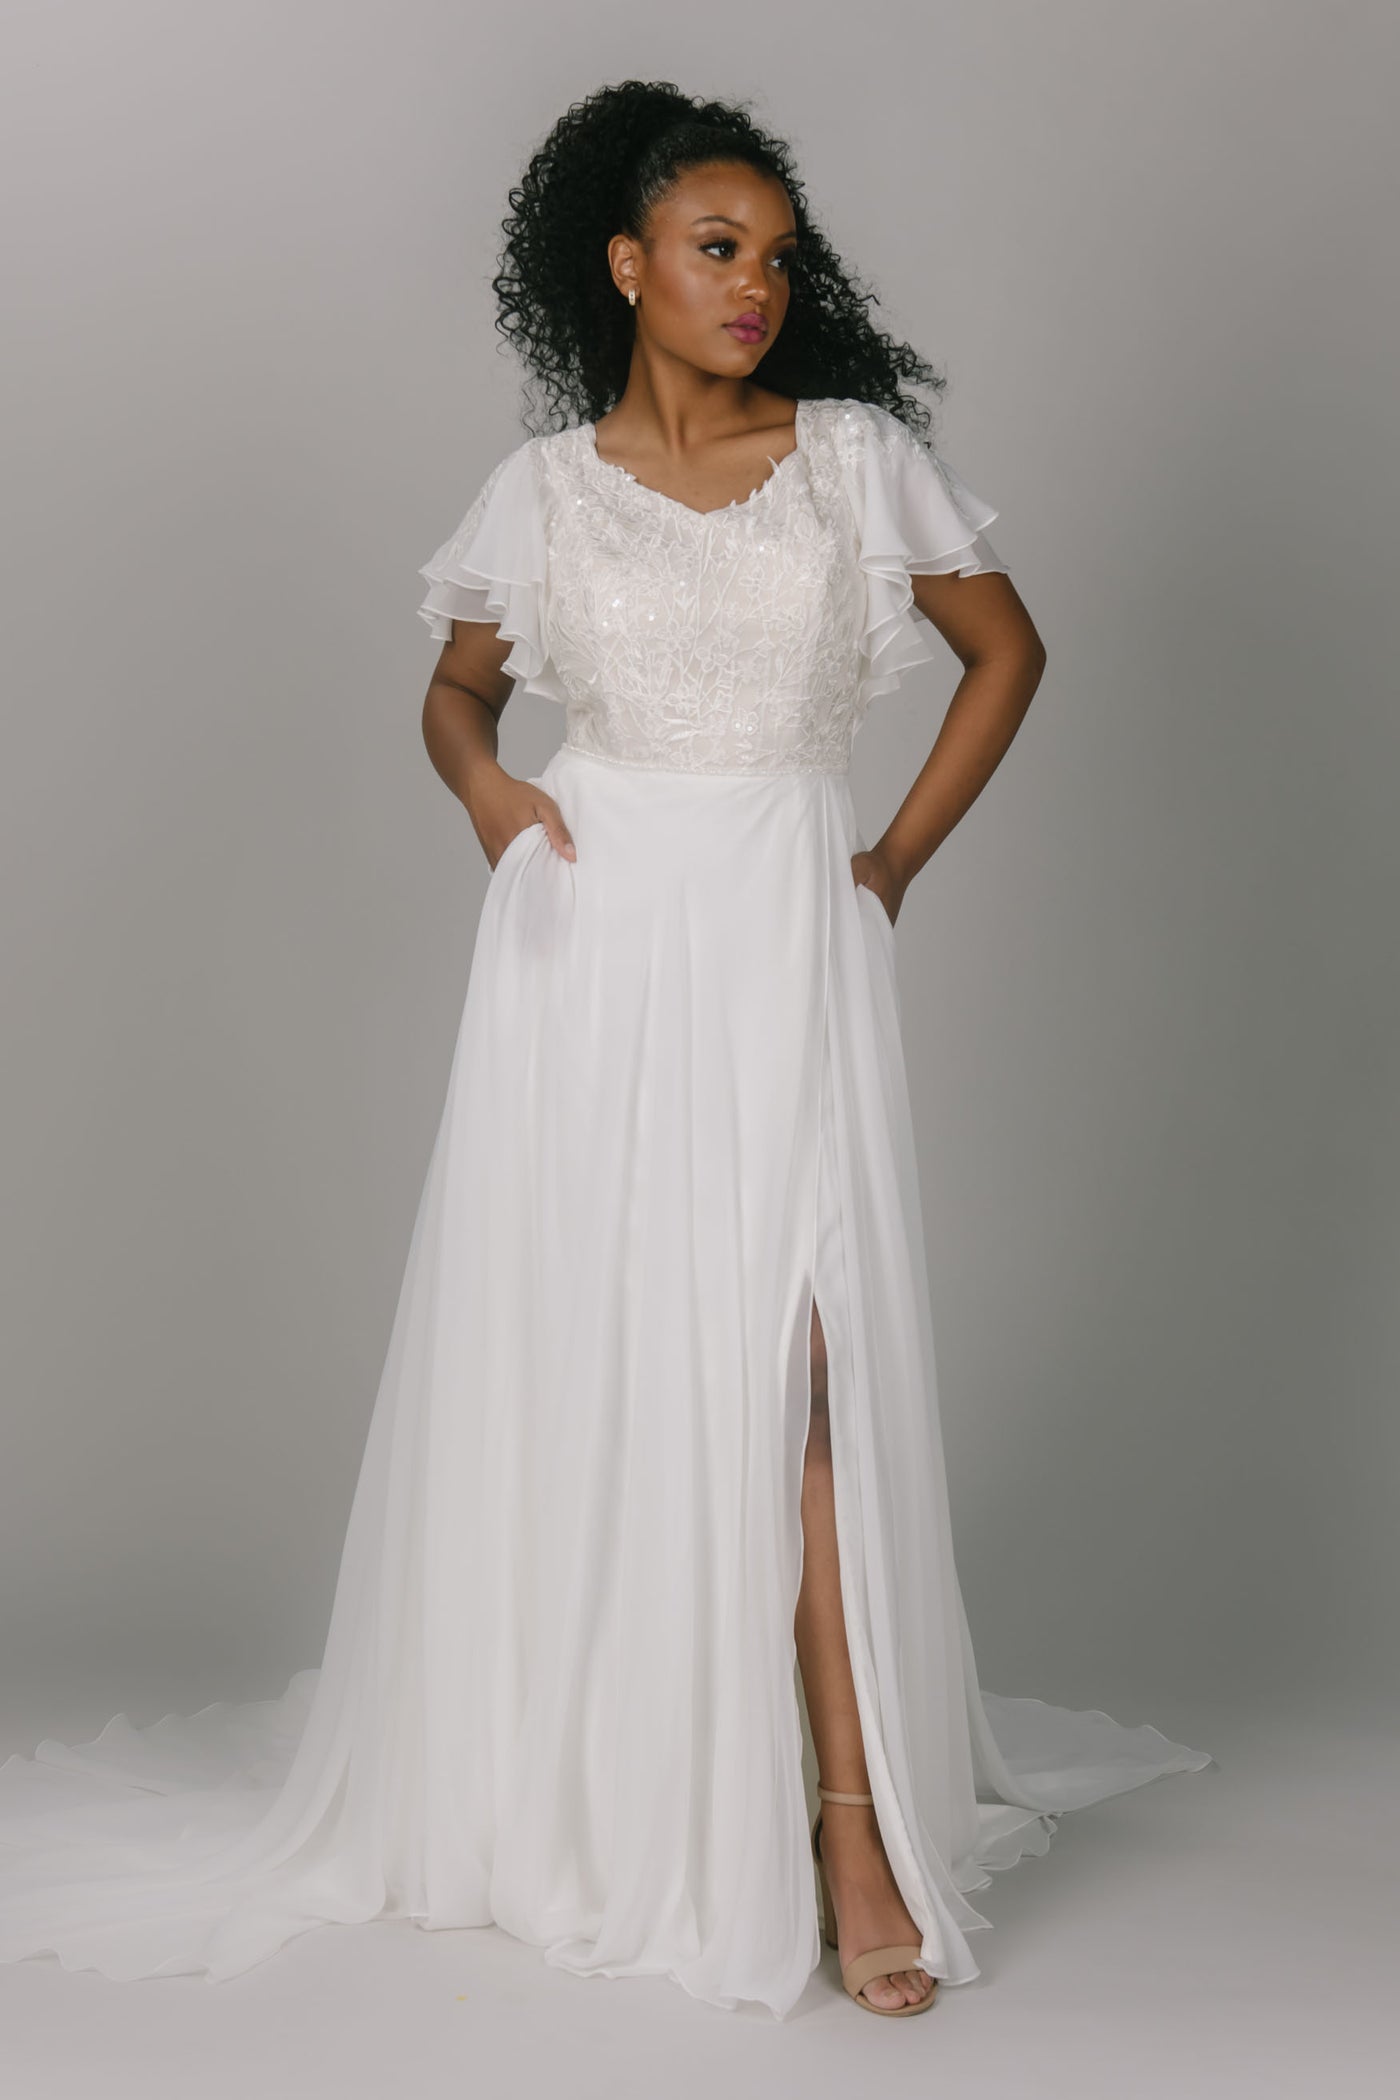 Modest wedding dress with flutter sleeves. It has a v-neckline and an a-line shape. The bottom is a flowy chiffon with a slit. The top is beaded lace. It has covered buttons down the back.